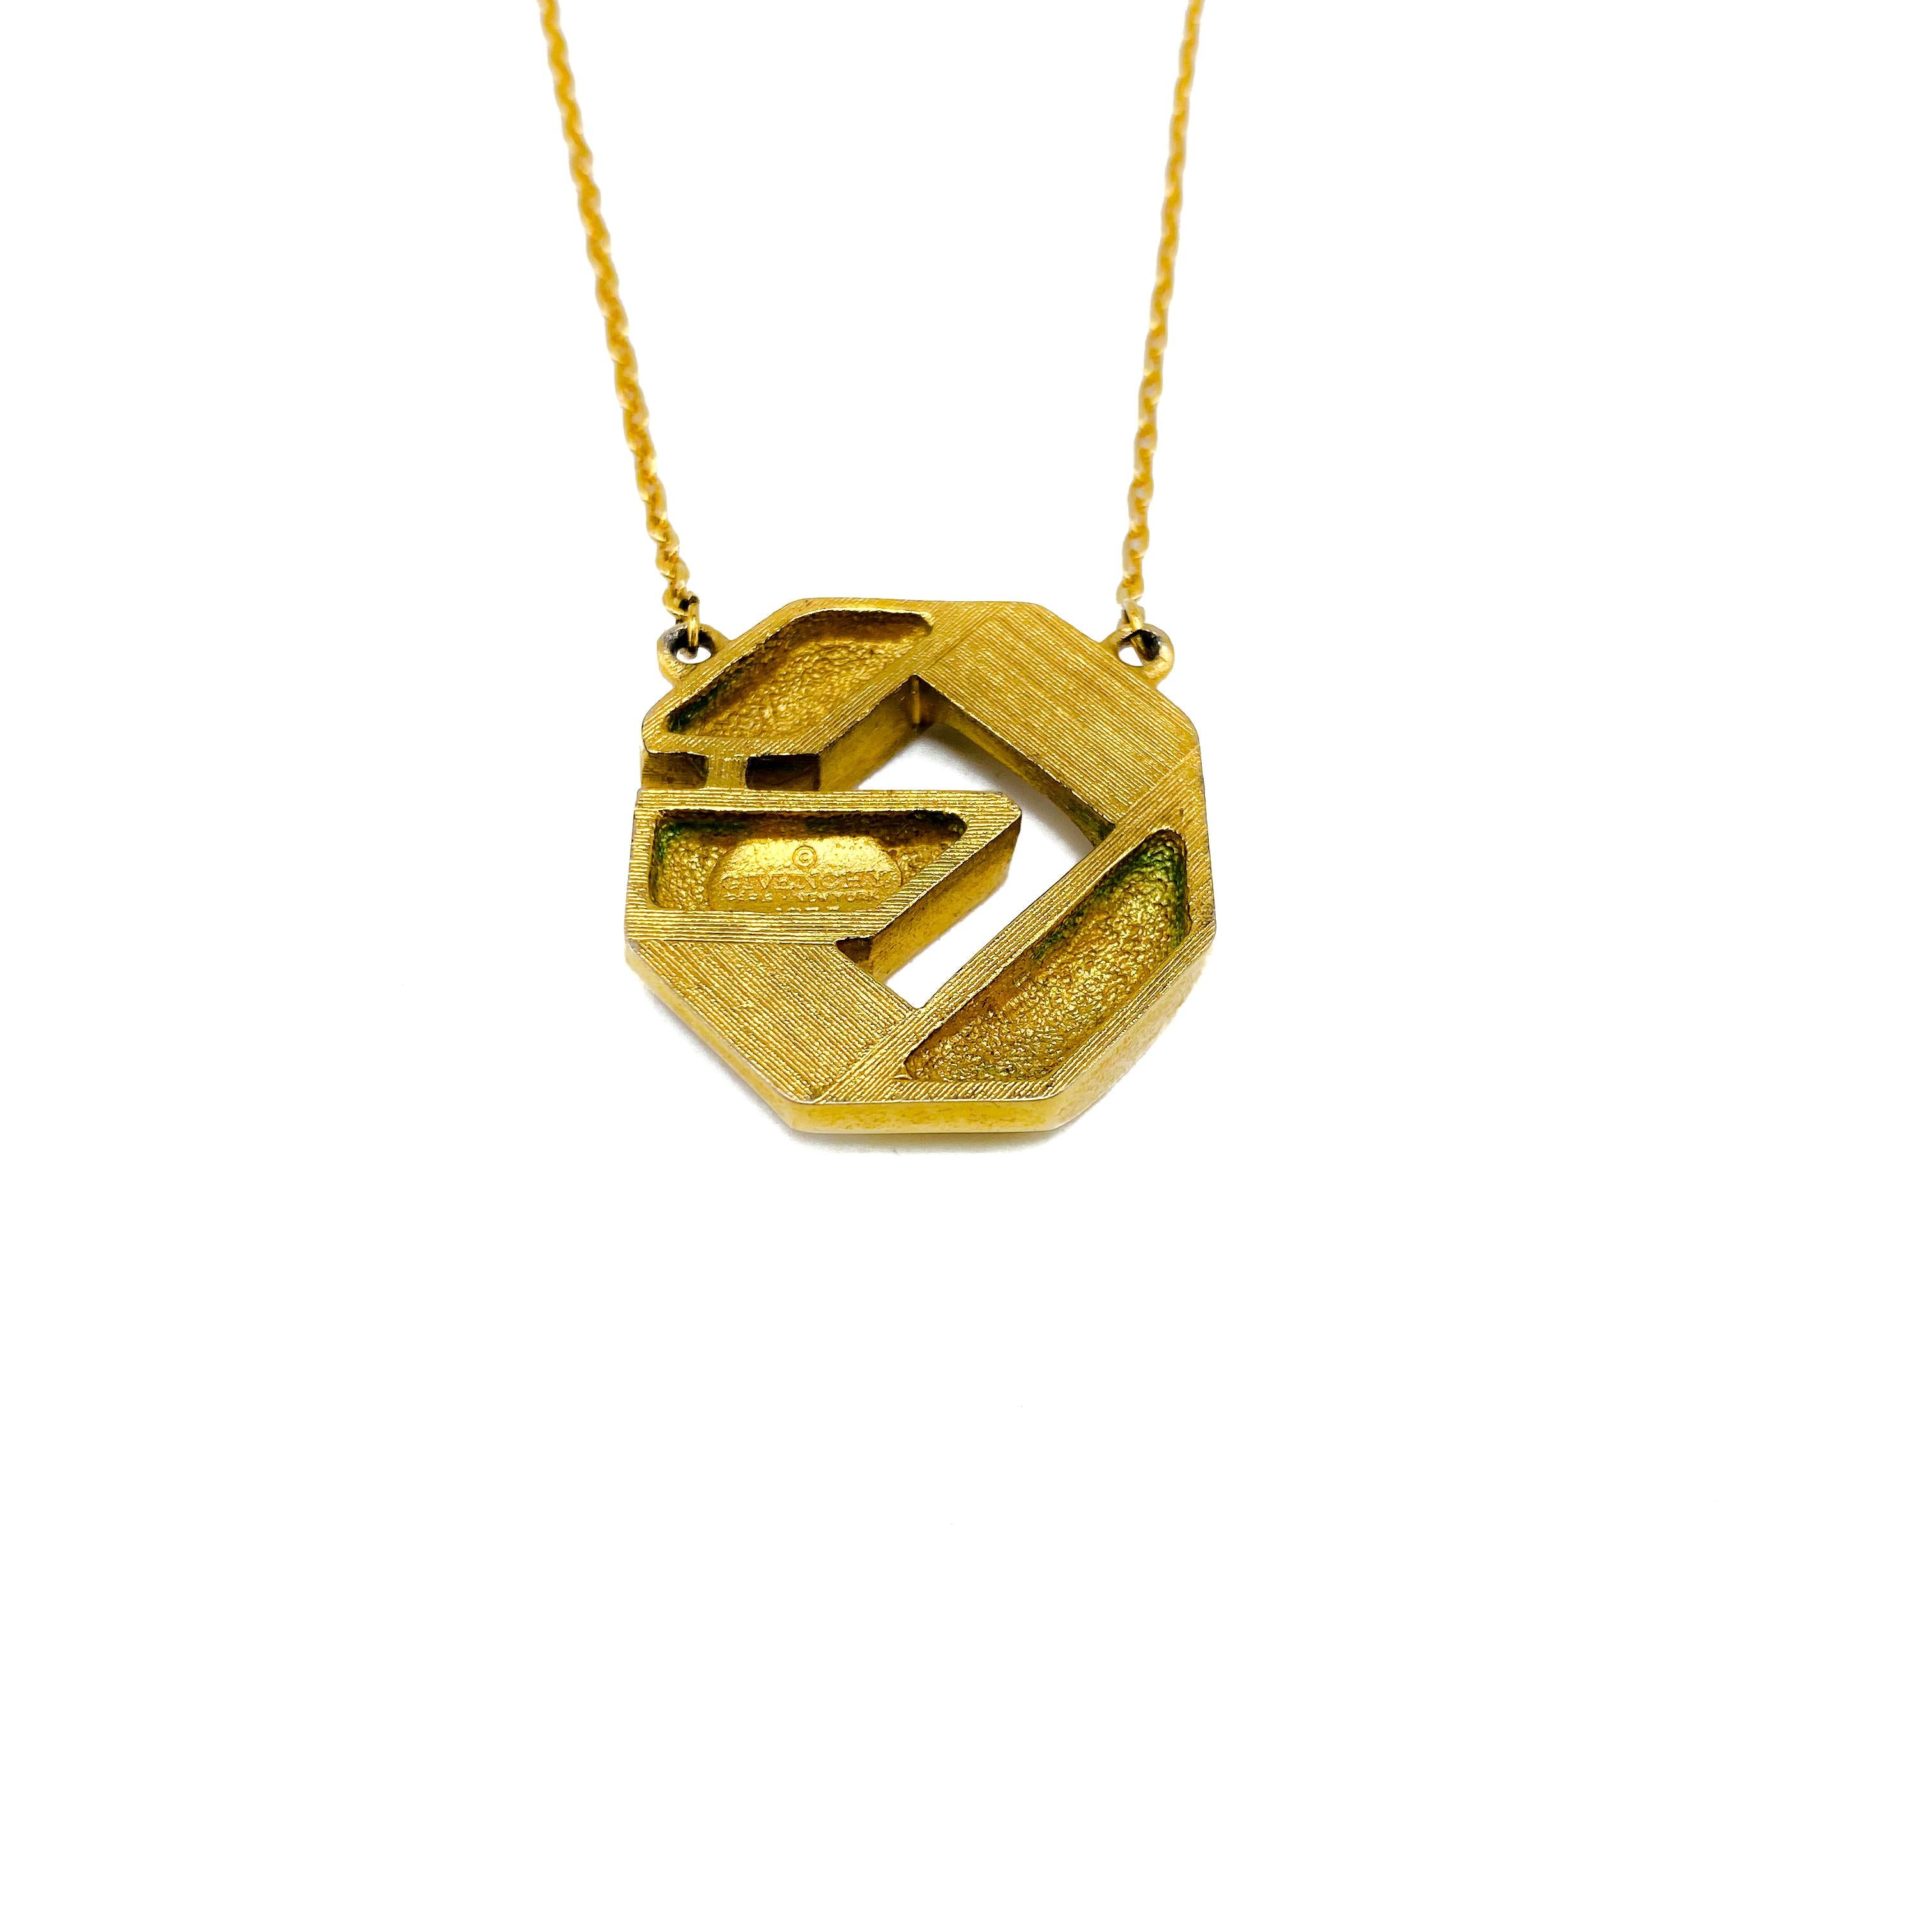 Women's Vintage Givenchy 1970s Gold Plated Pendant Necklace - 1977 Collection